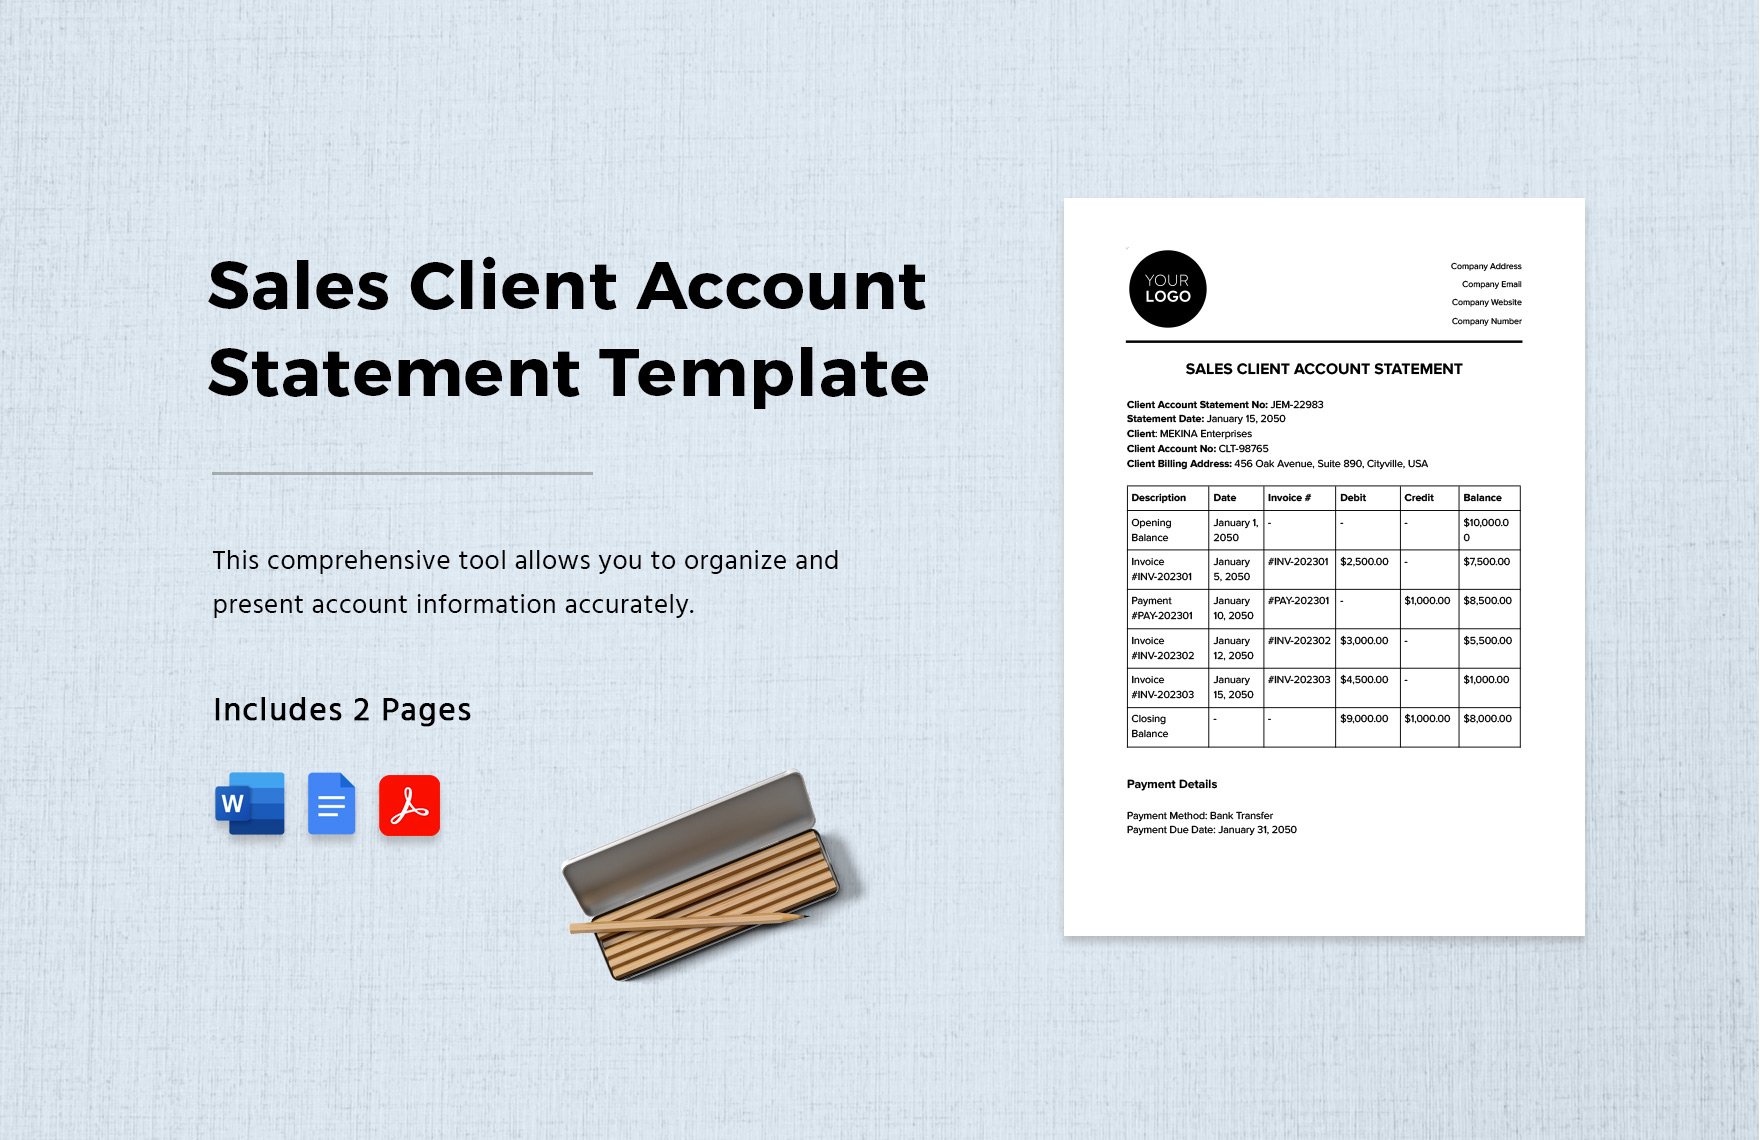 Sales Client Account Statement Template in Word, Google Docs, PDF